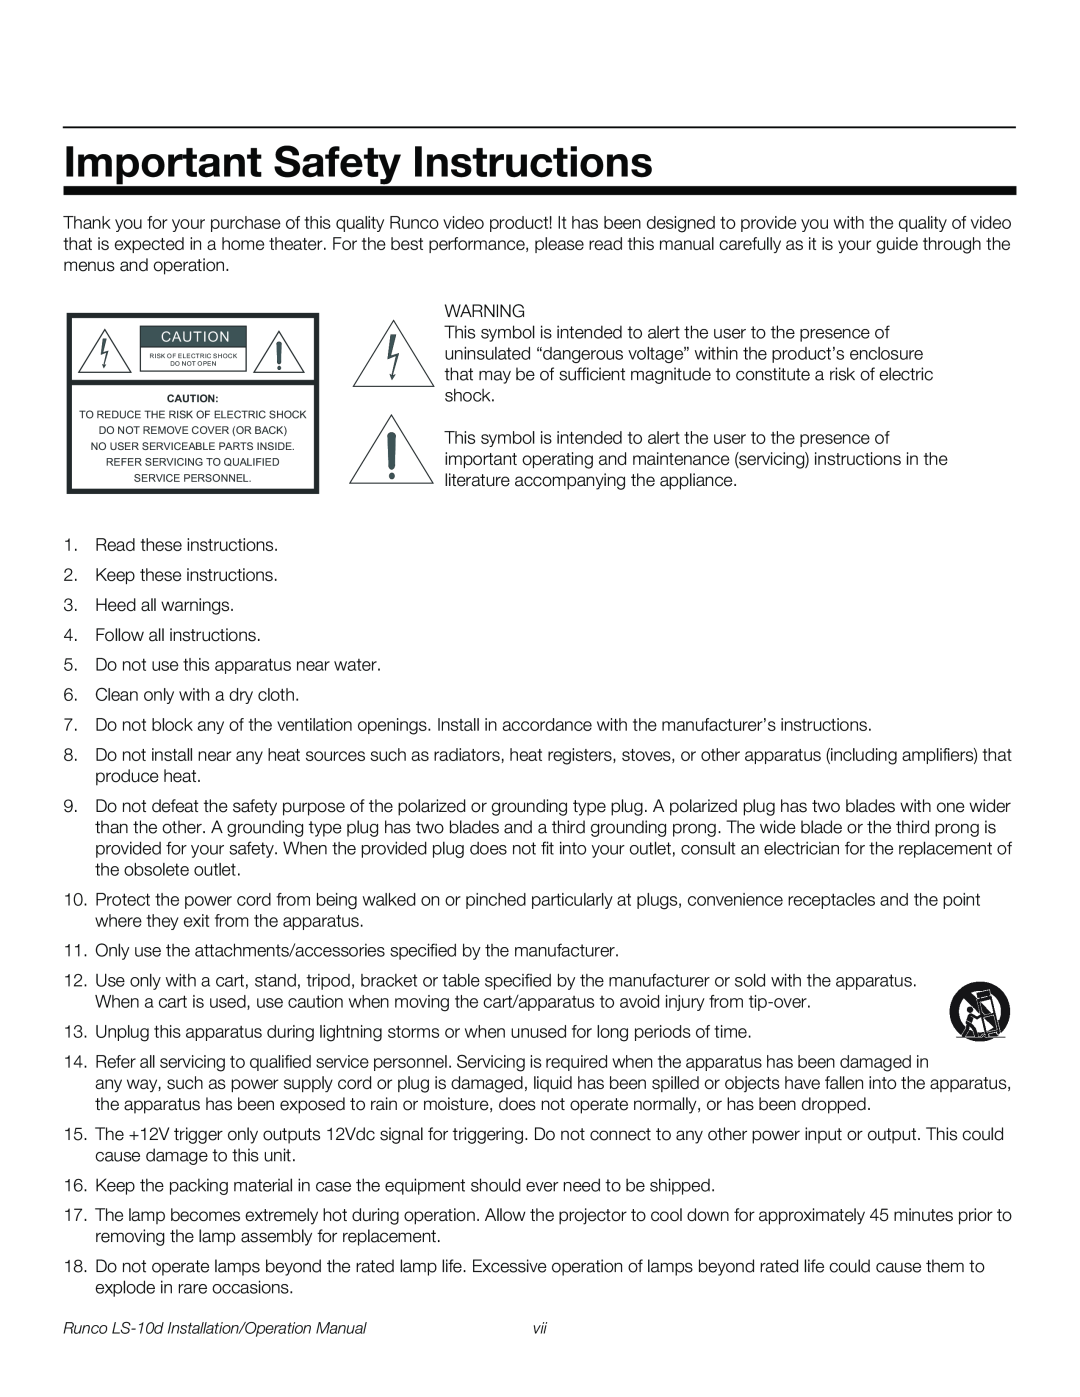 Runco LS-10D operation manual Important Safety Instructions 